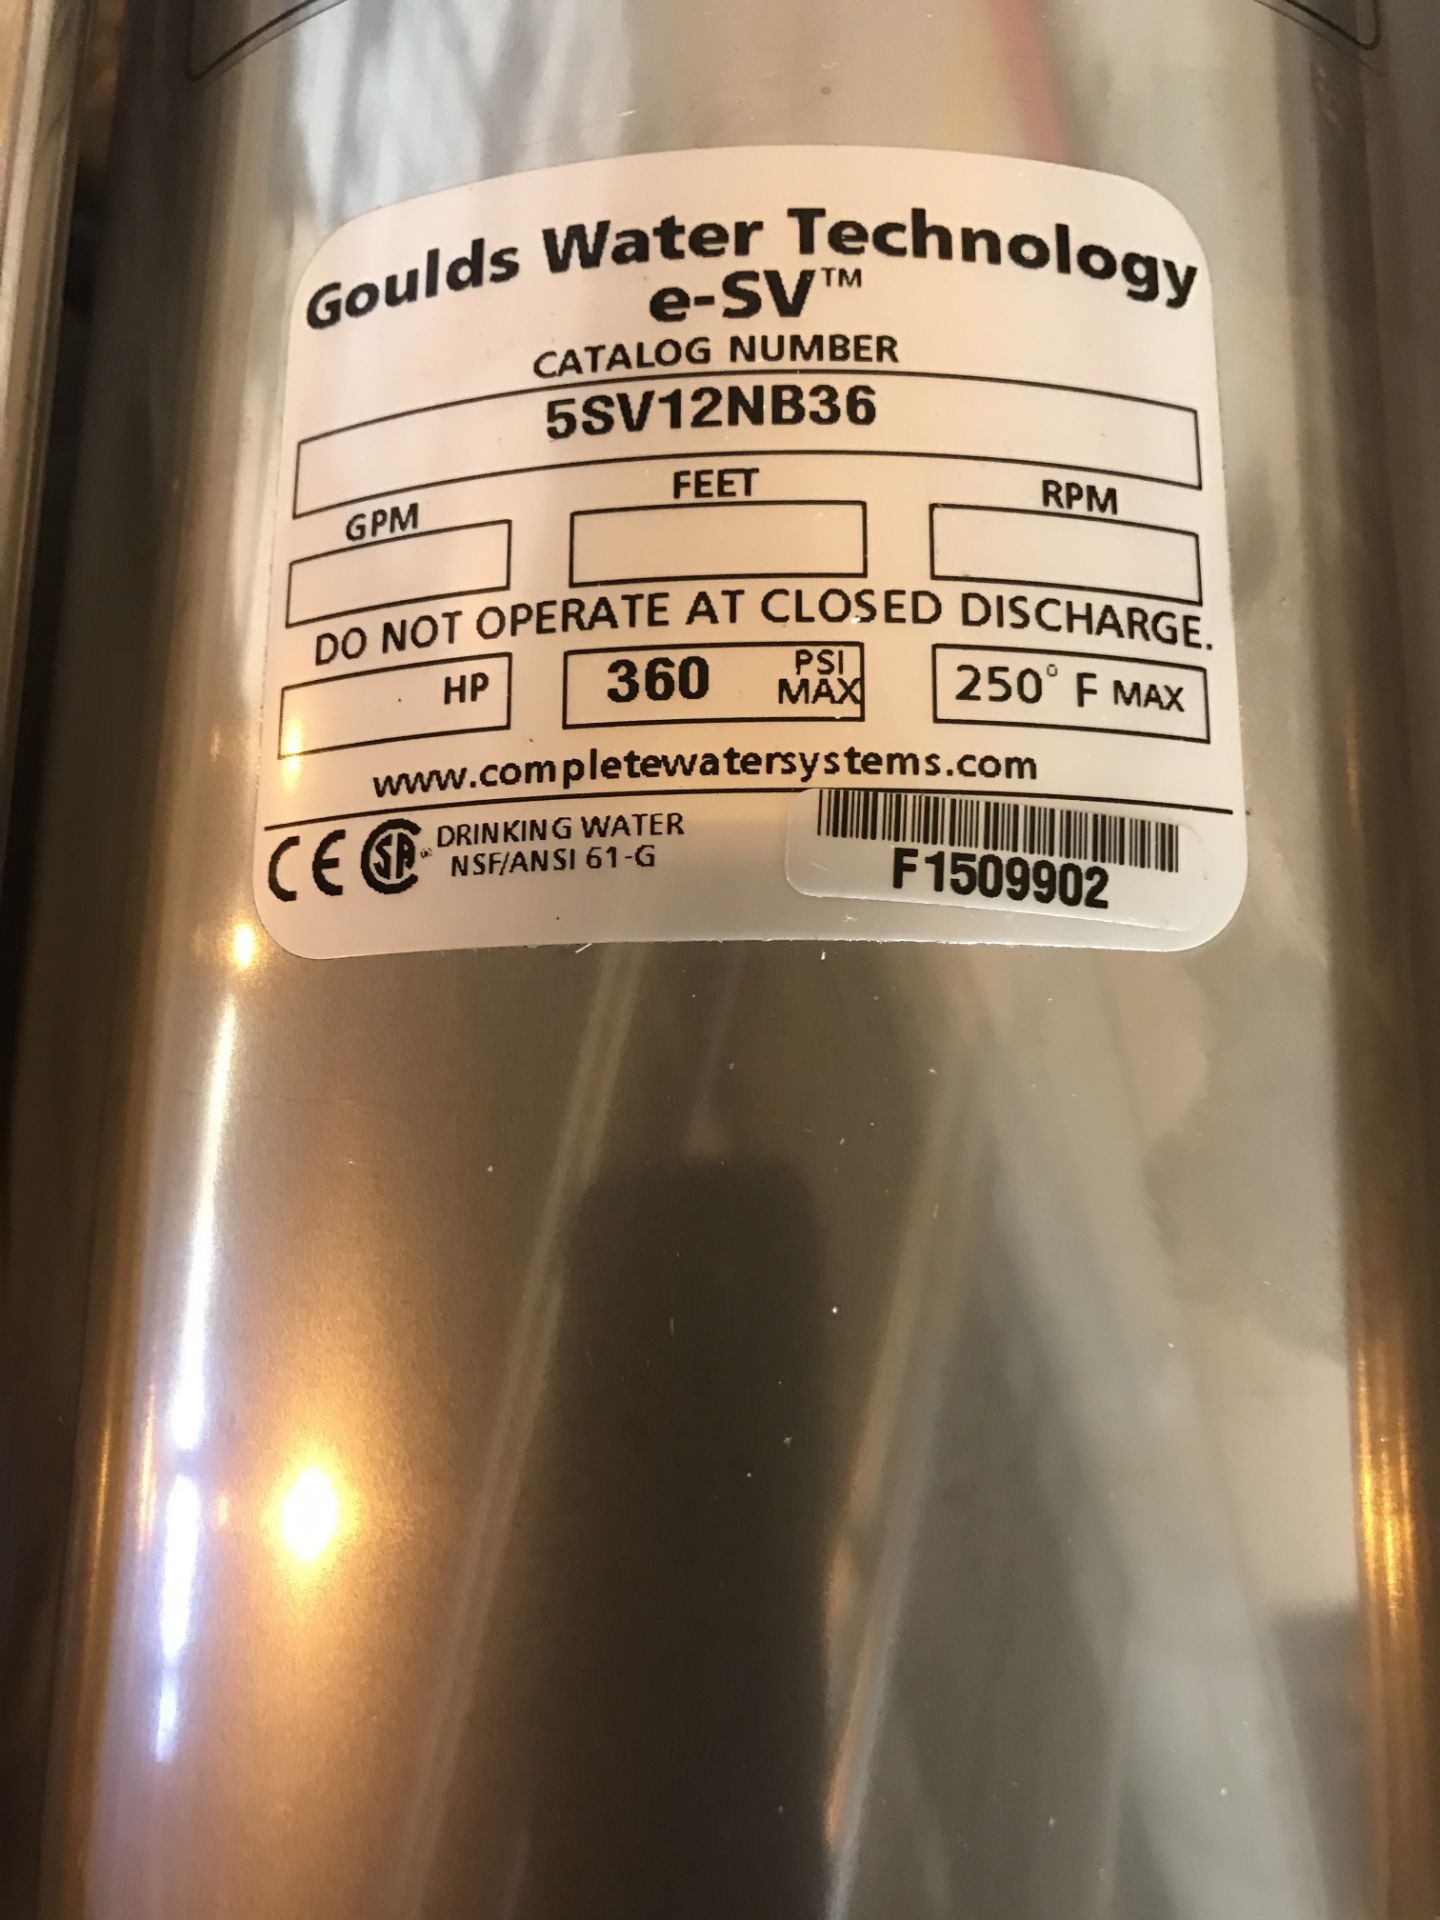 Pump, Goulds Water Technology e-SV, New in Box - Image 2 of 4